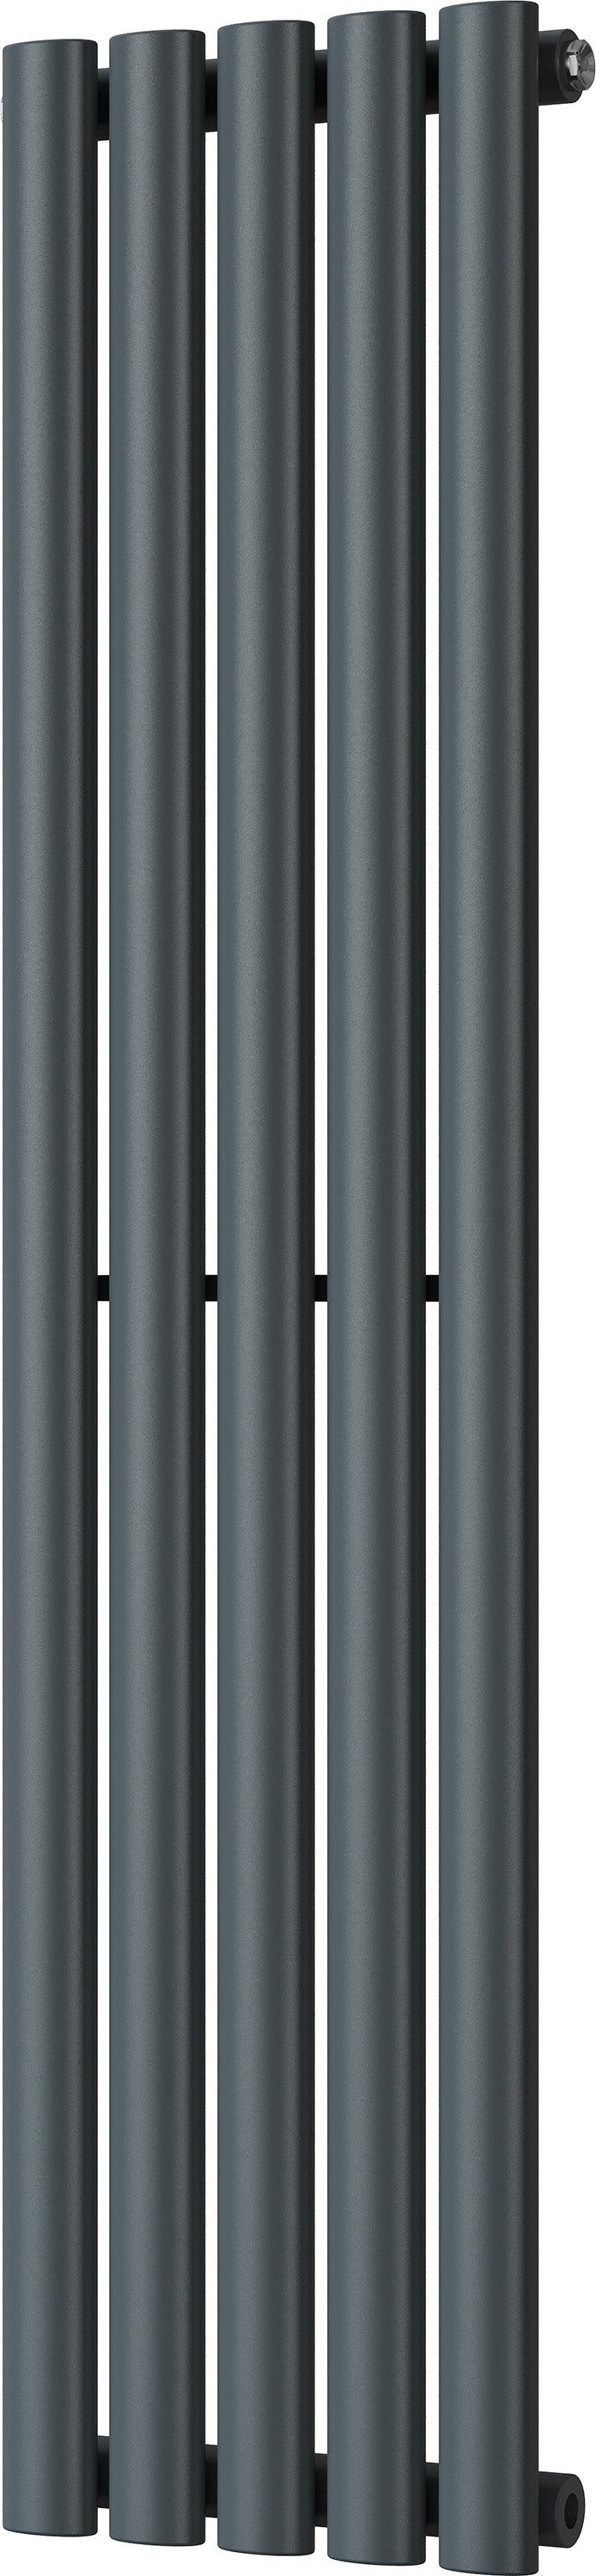 Omeara - Anthracite Vertical Radiator H1200mm x W290mm Single Panel